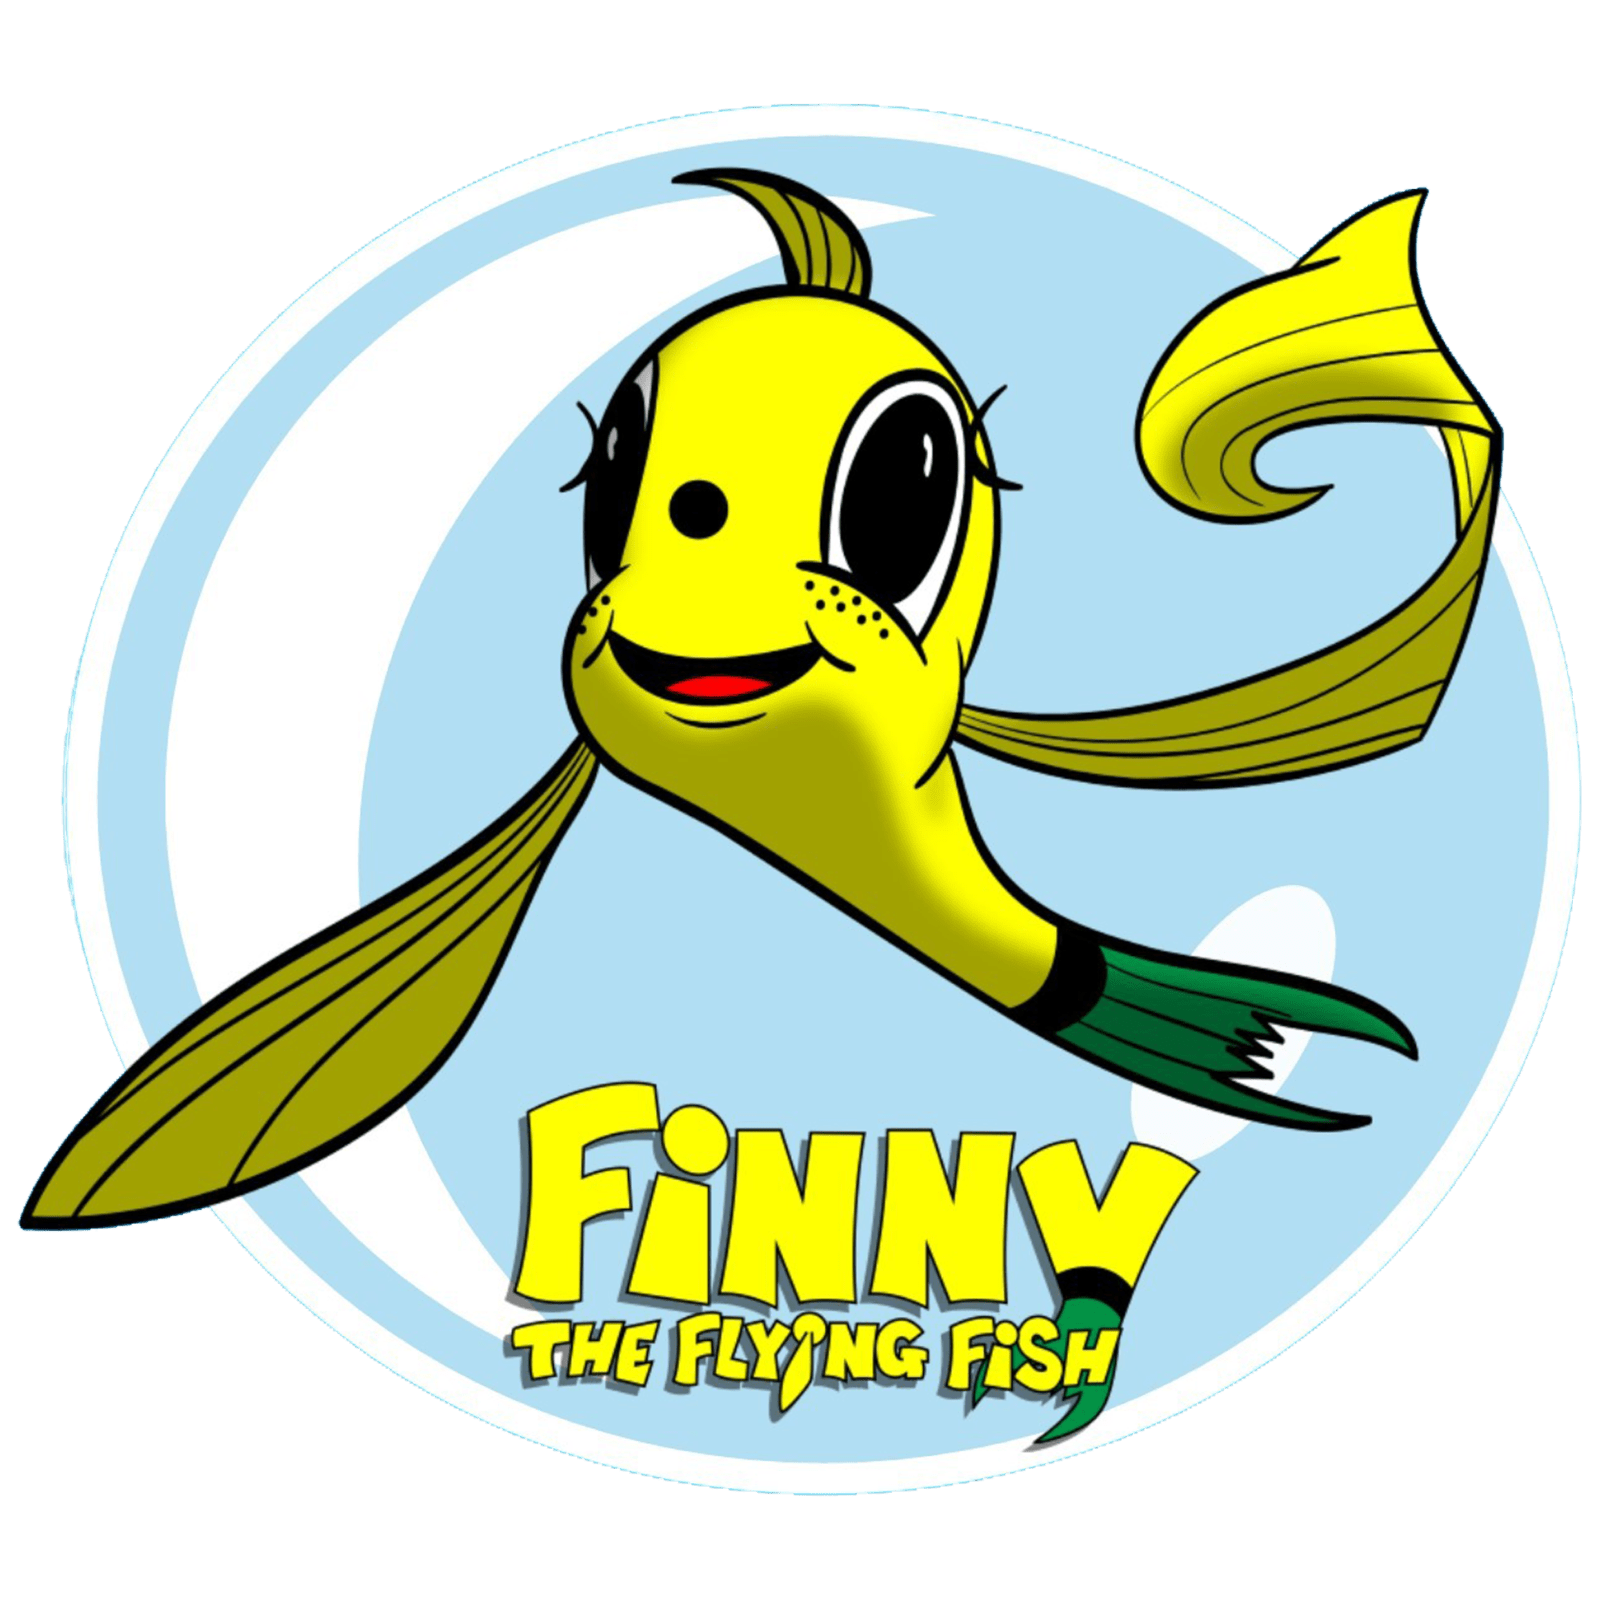 Finny The Flying Fish